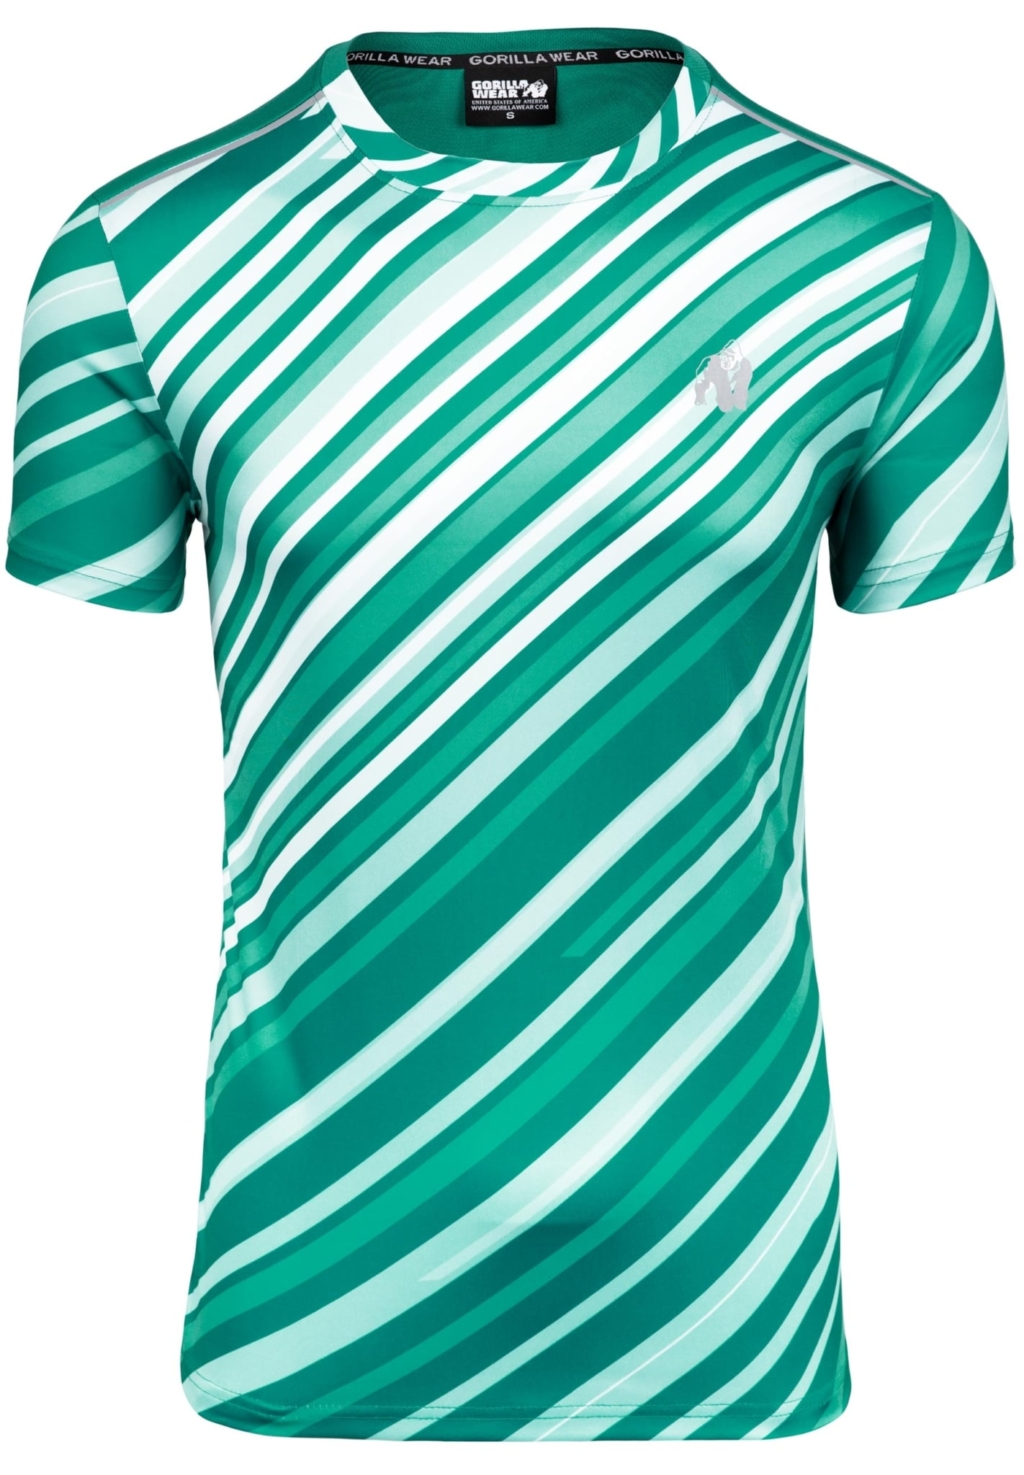 90579440 easton t shirt teal green 01 scaled